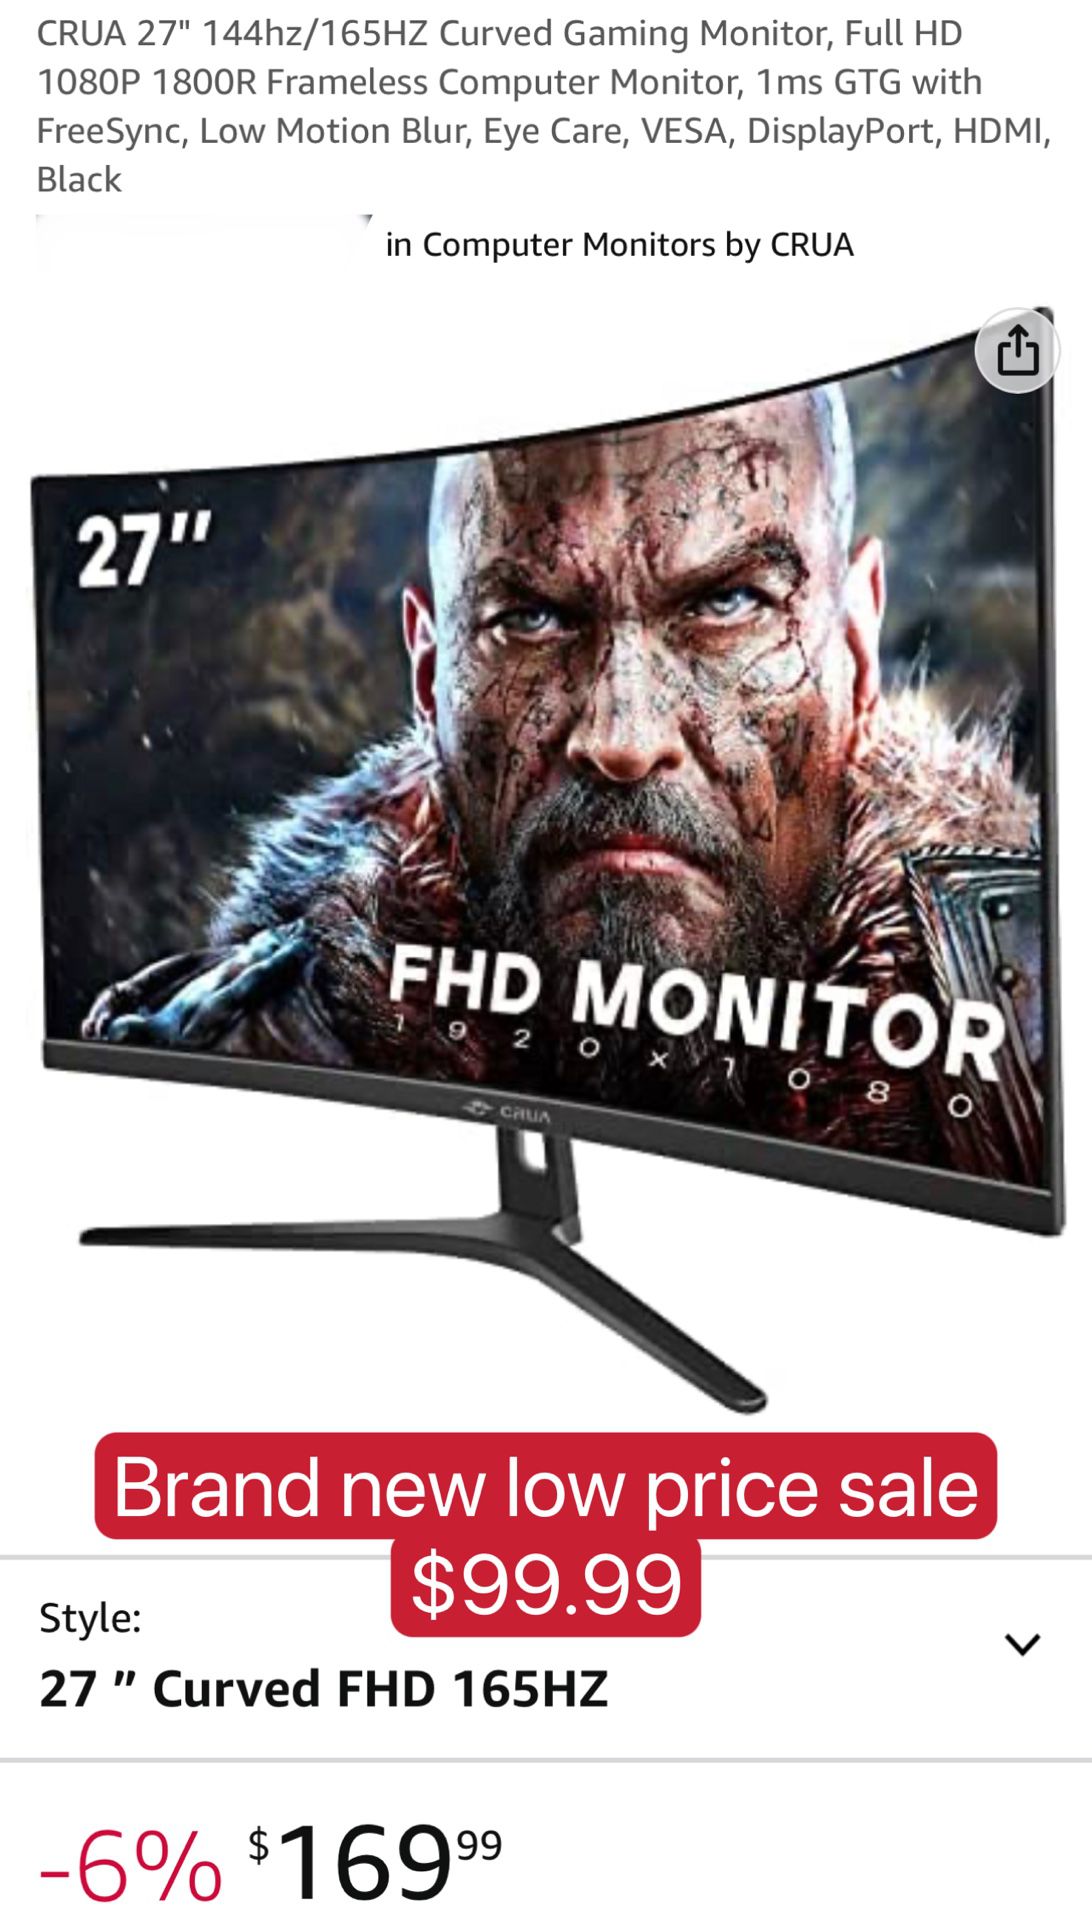 27" 165HZ Curved Gaming Monitor, Full HD 1080P 1800R Frameless Computer Monitor, 1ms GTG with FreeSync, Low Motion Blur, Eye Care, VESA, Display